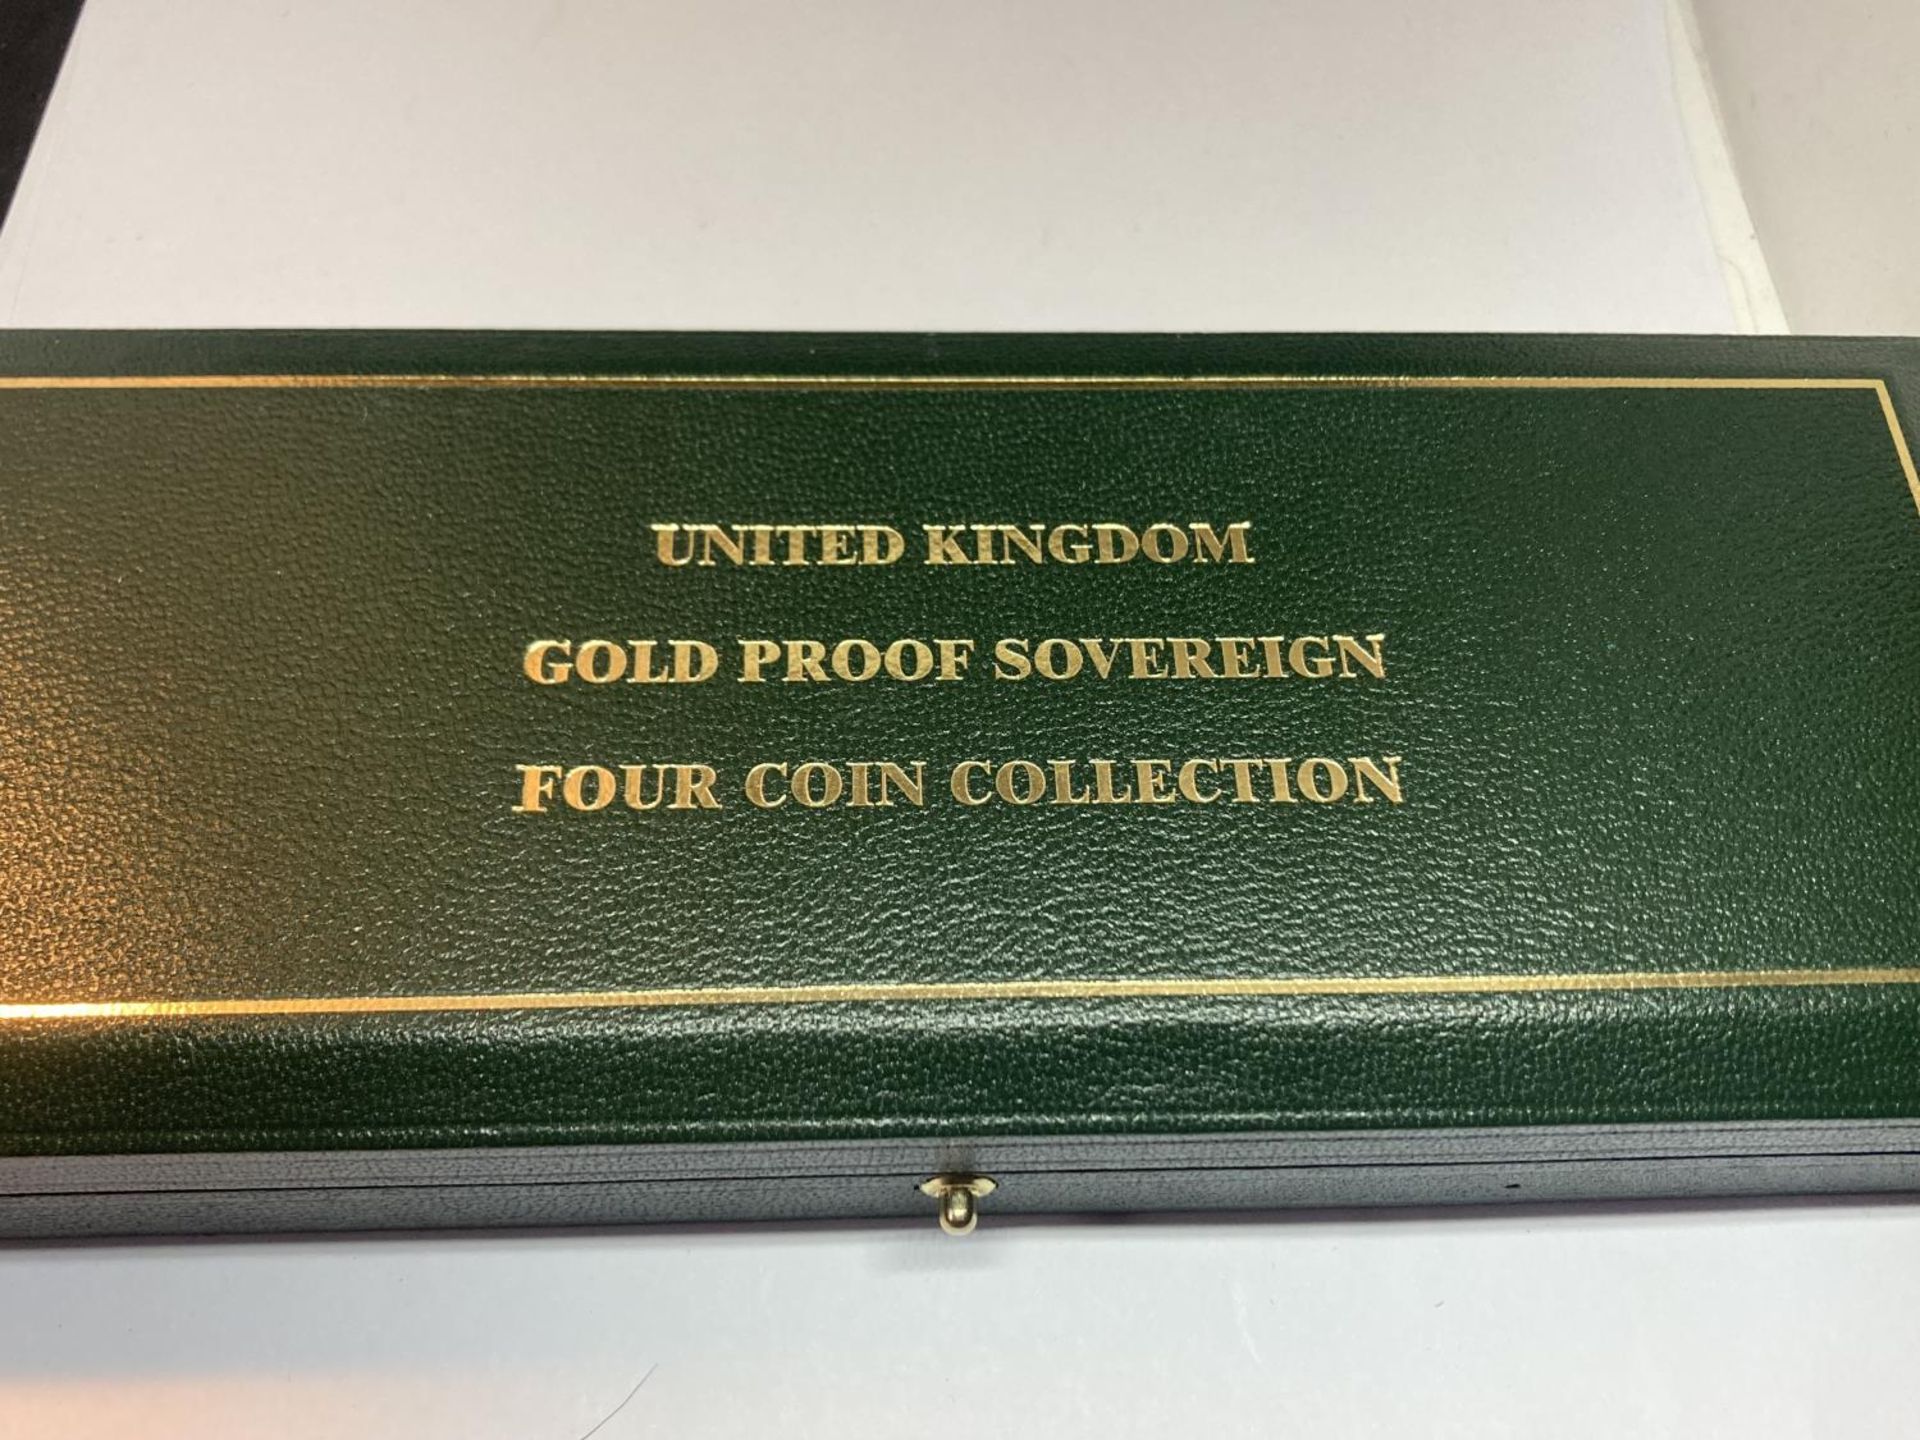 A 2002 ROYAL MINT GOLD PROOF FOUR COIN COLLECTION CELEBRATING QUEEN ELIZABETH II GOLDEN JUBILEE TO - Image 11 of 11